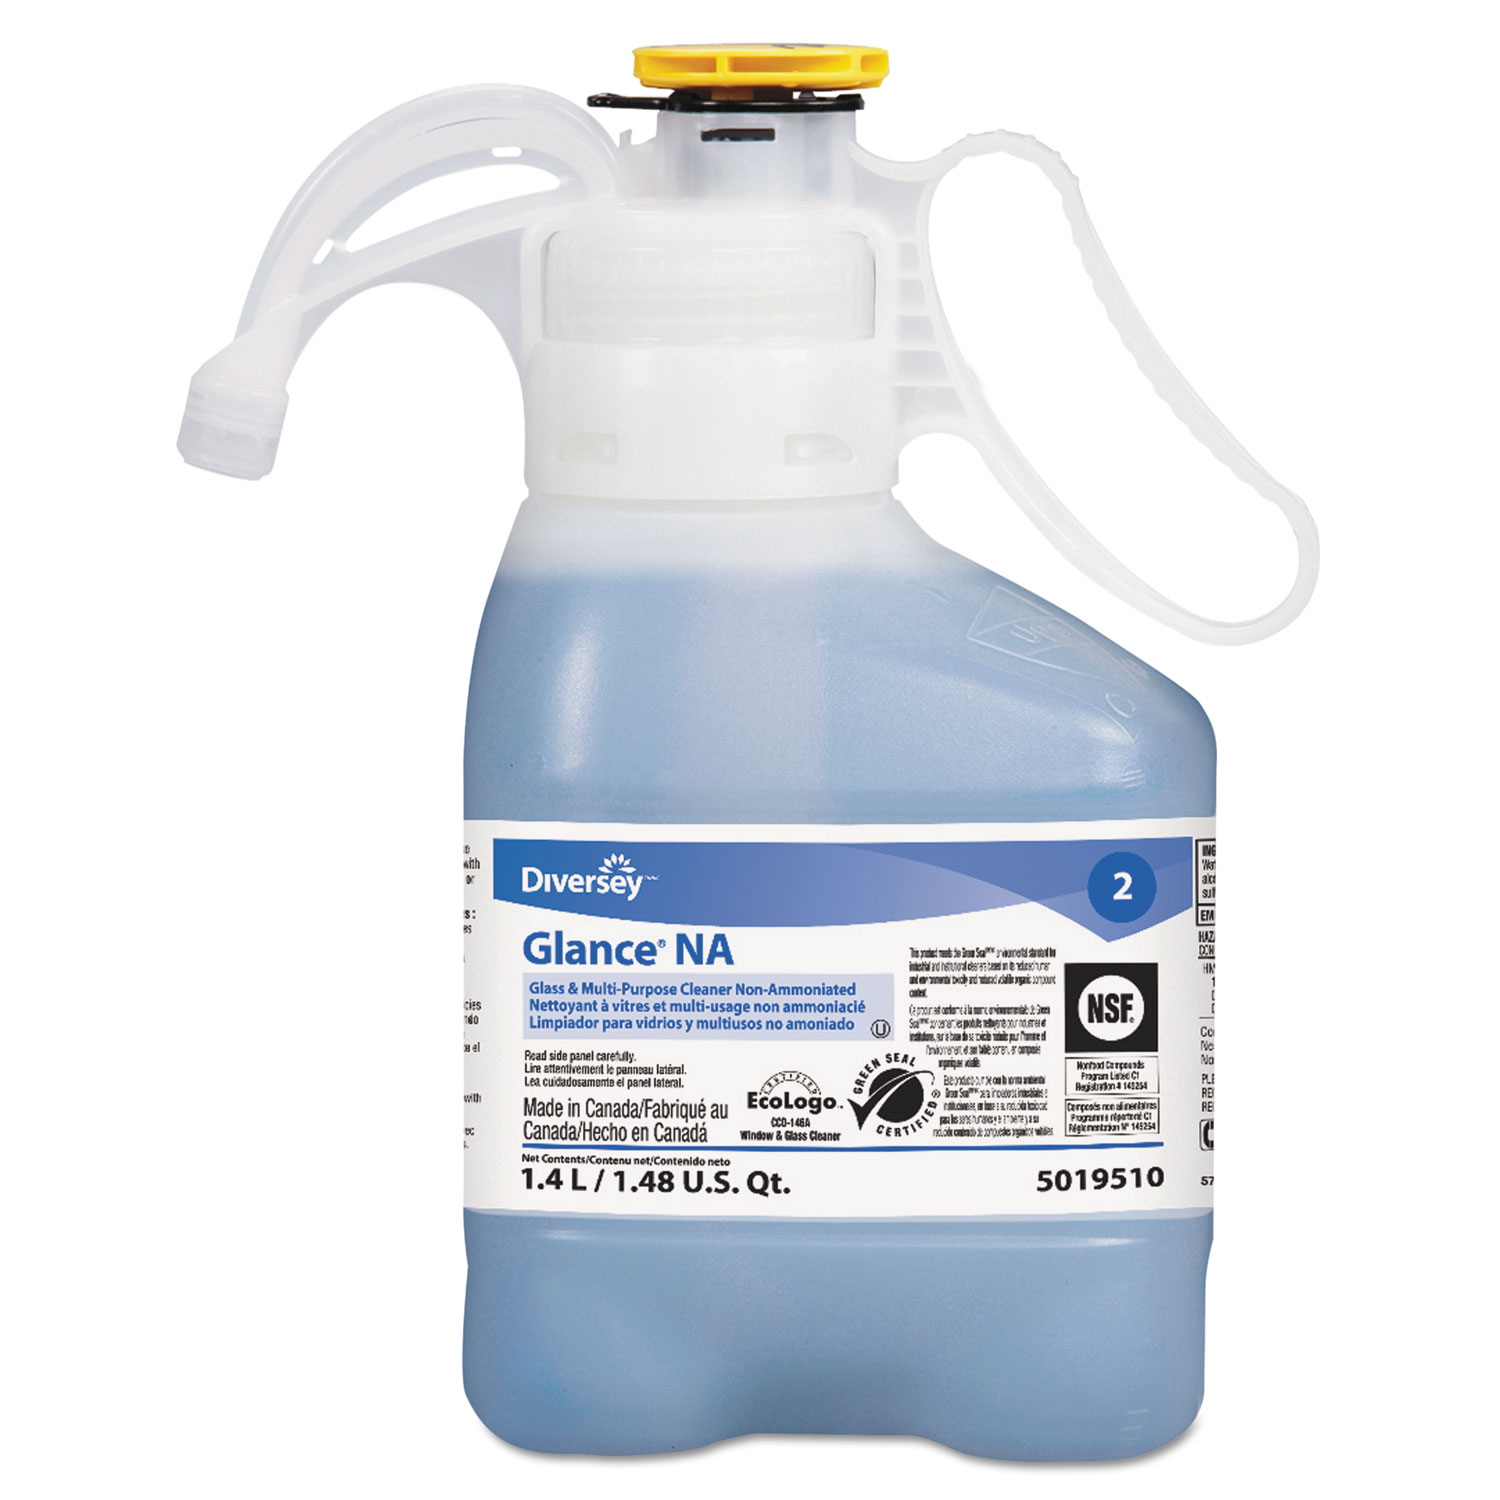  Diversey 95019510 Glance NA Glass and Surface Cleaner Non-Ammoniated, 1400mL Bottle, 2/Carton (DVO95019510) 